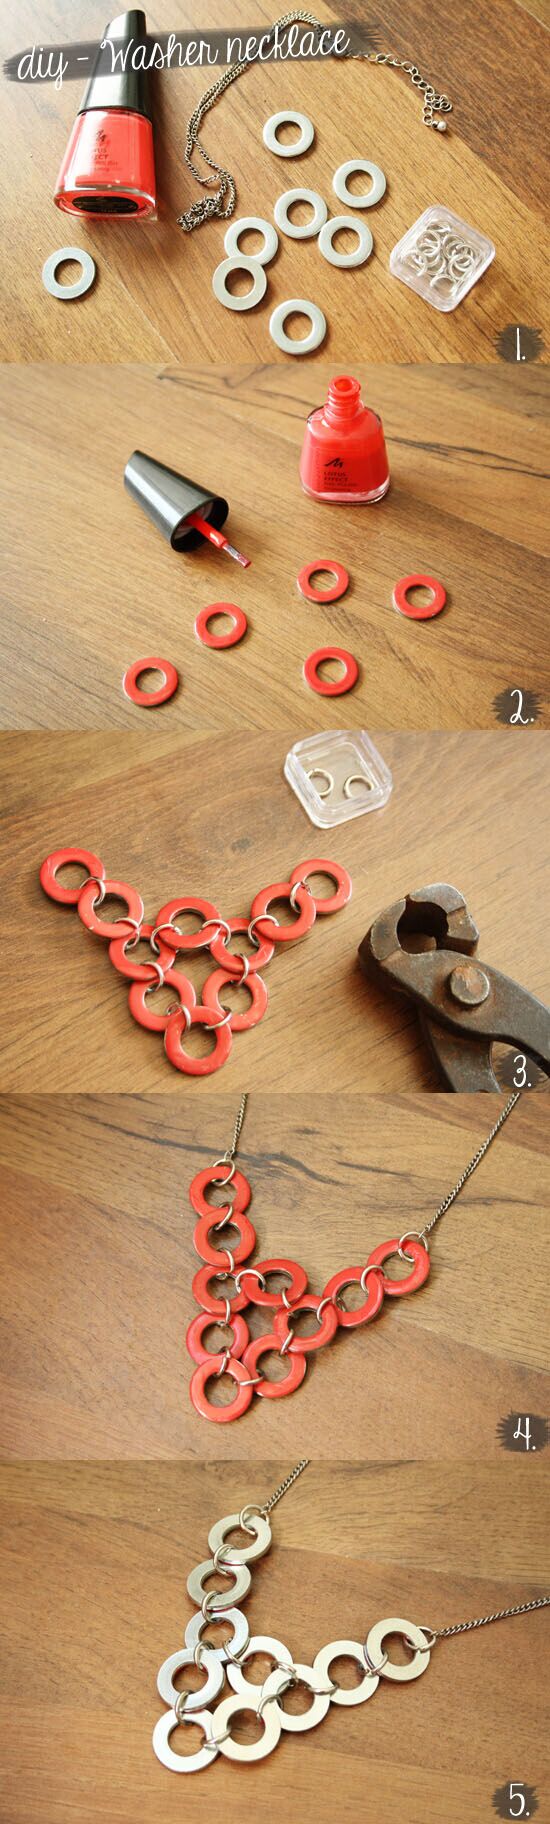 DIY- Washer Necklace